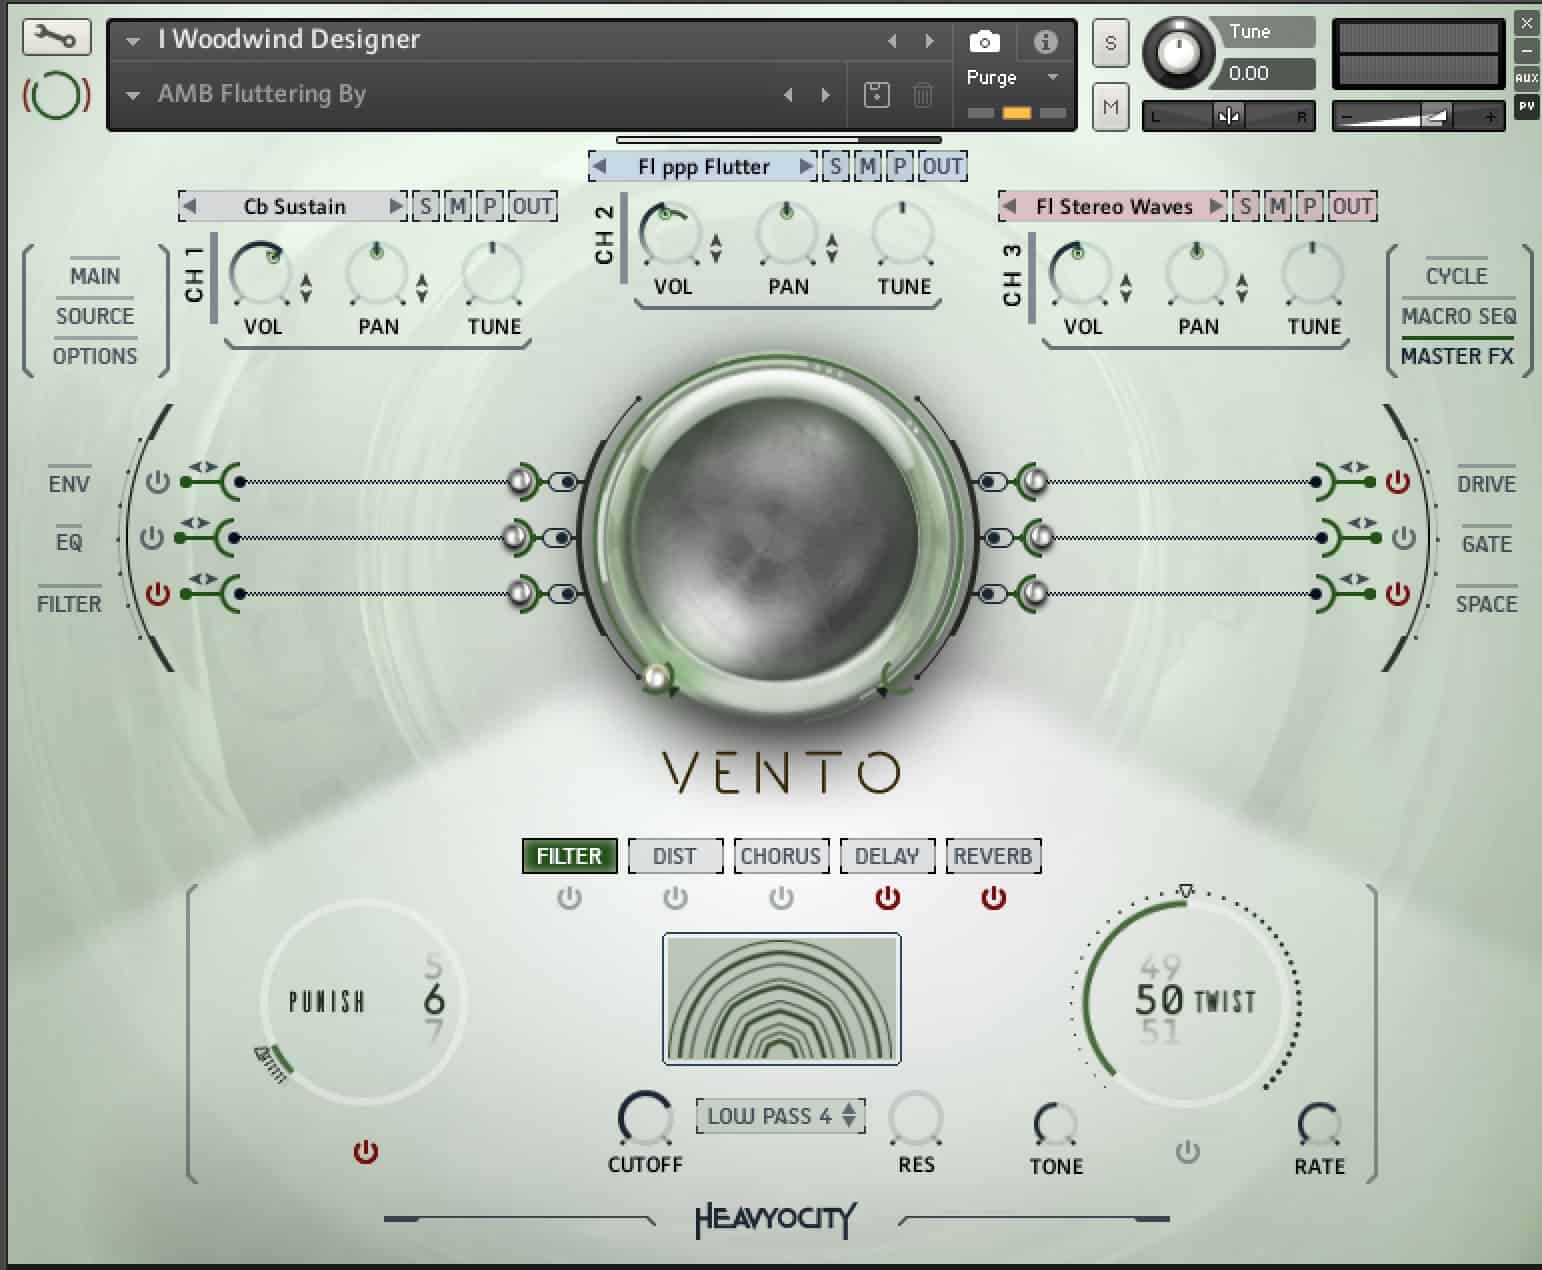 VENTO Modern Woodwinds by Heavyocity Review Woodwind Designer